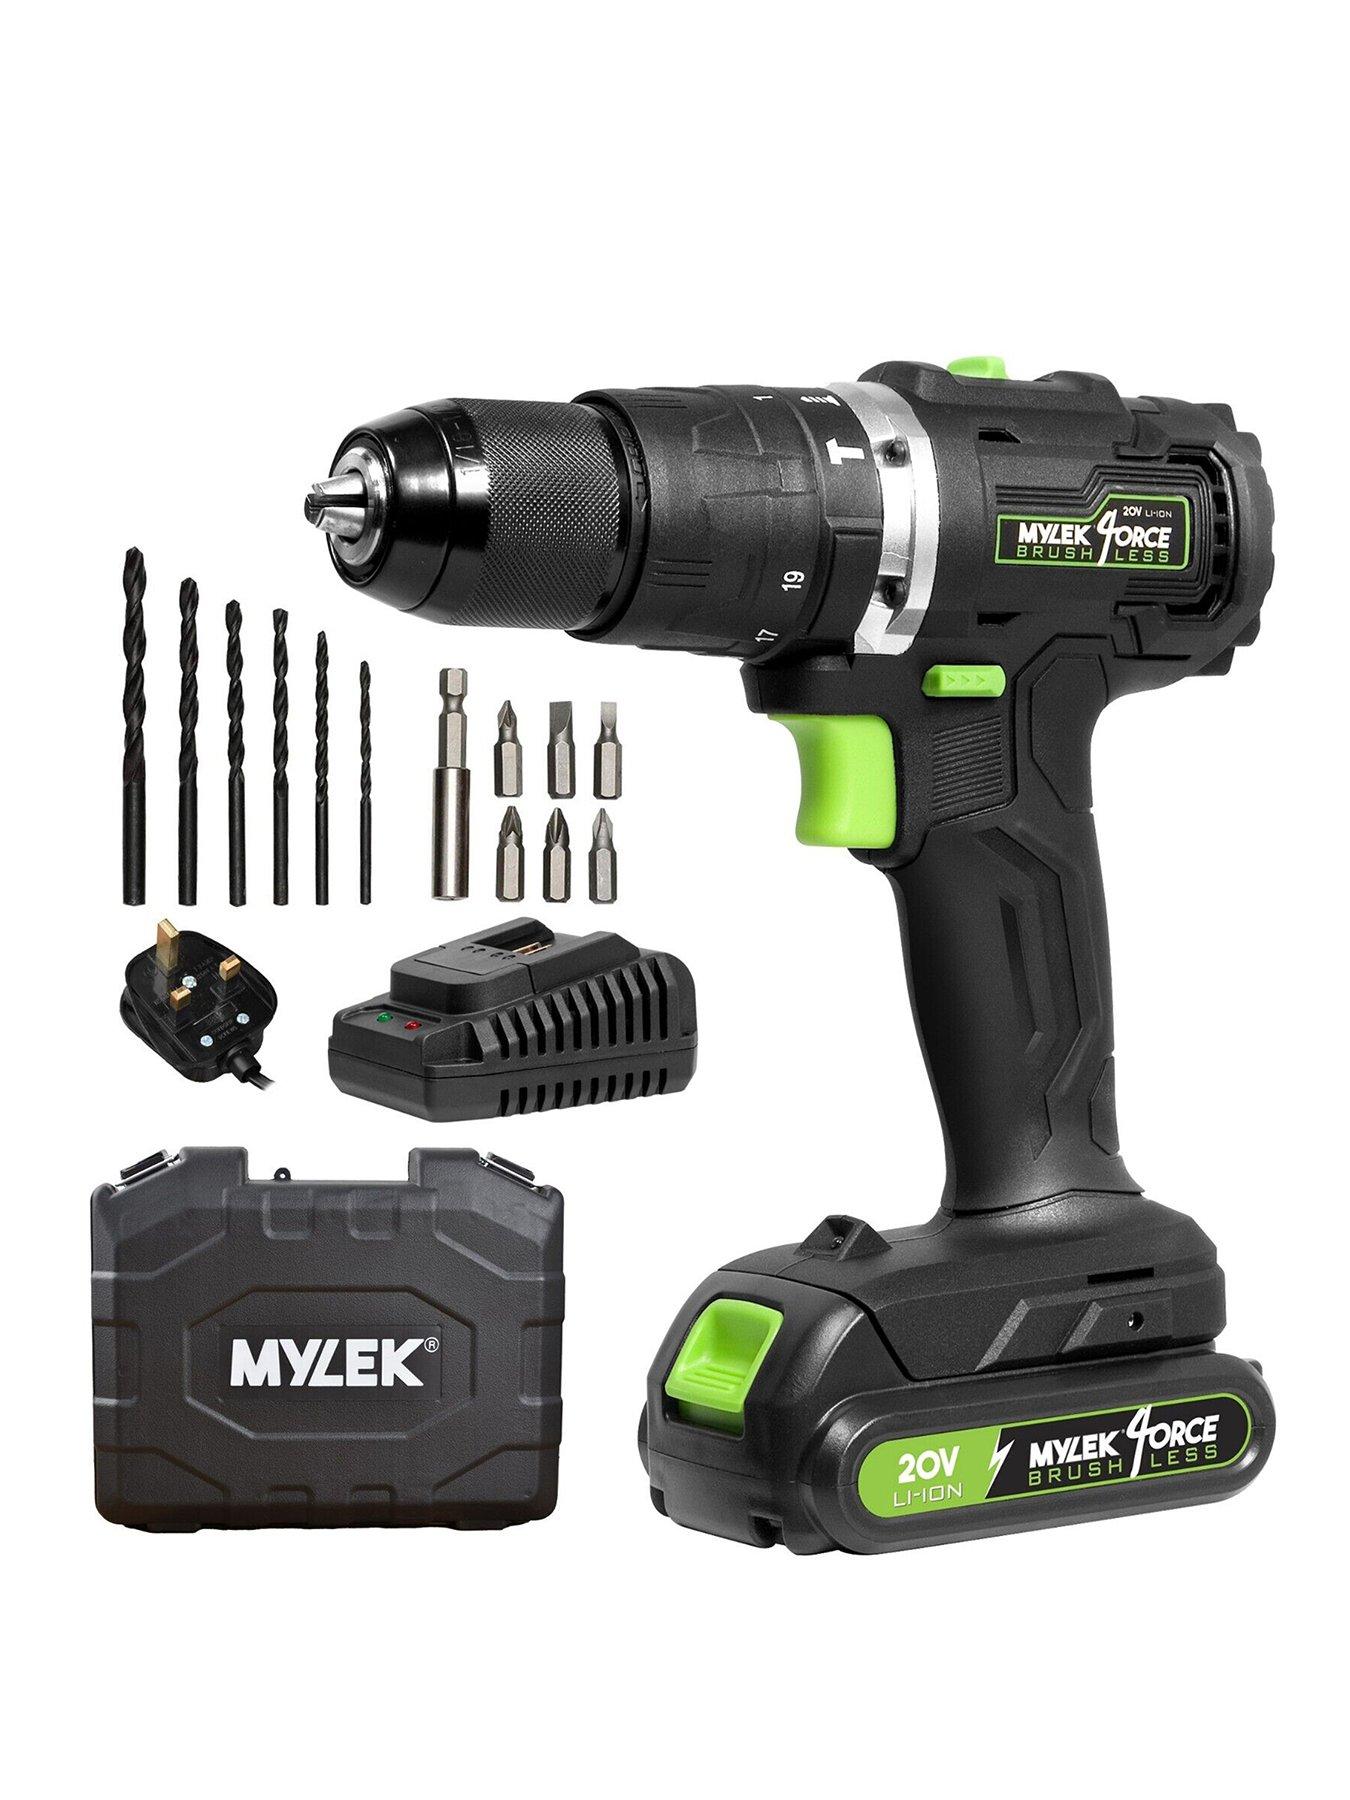 Mylek Cordless Drill 20V Brushless Driver Impact Hammer Action Combi Set With 20Ah Battery And Fast Charger 50Nm Electric Screwdriver 193 Torque